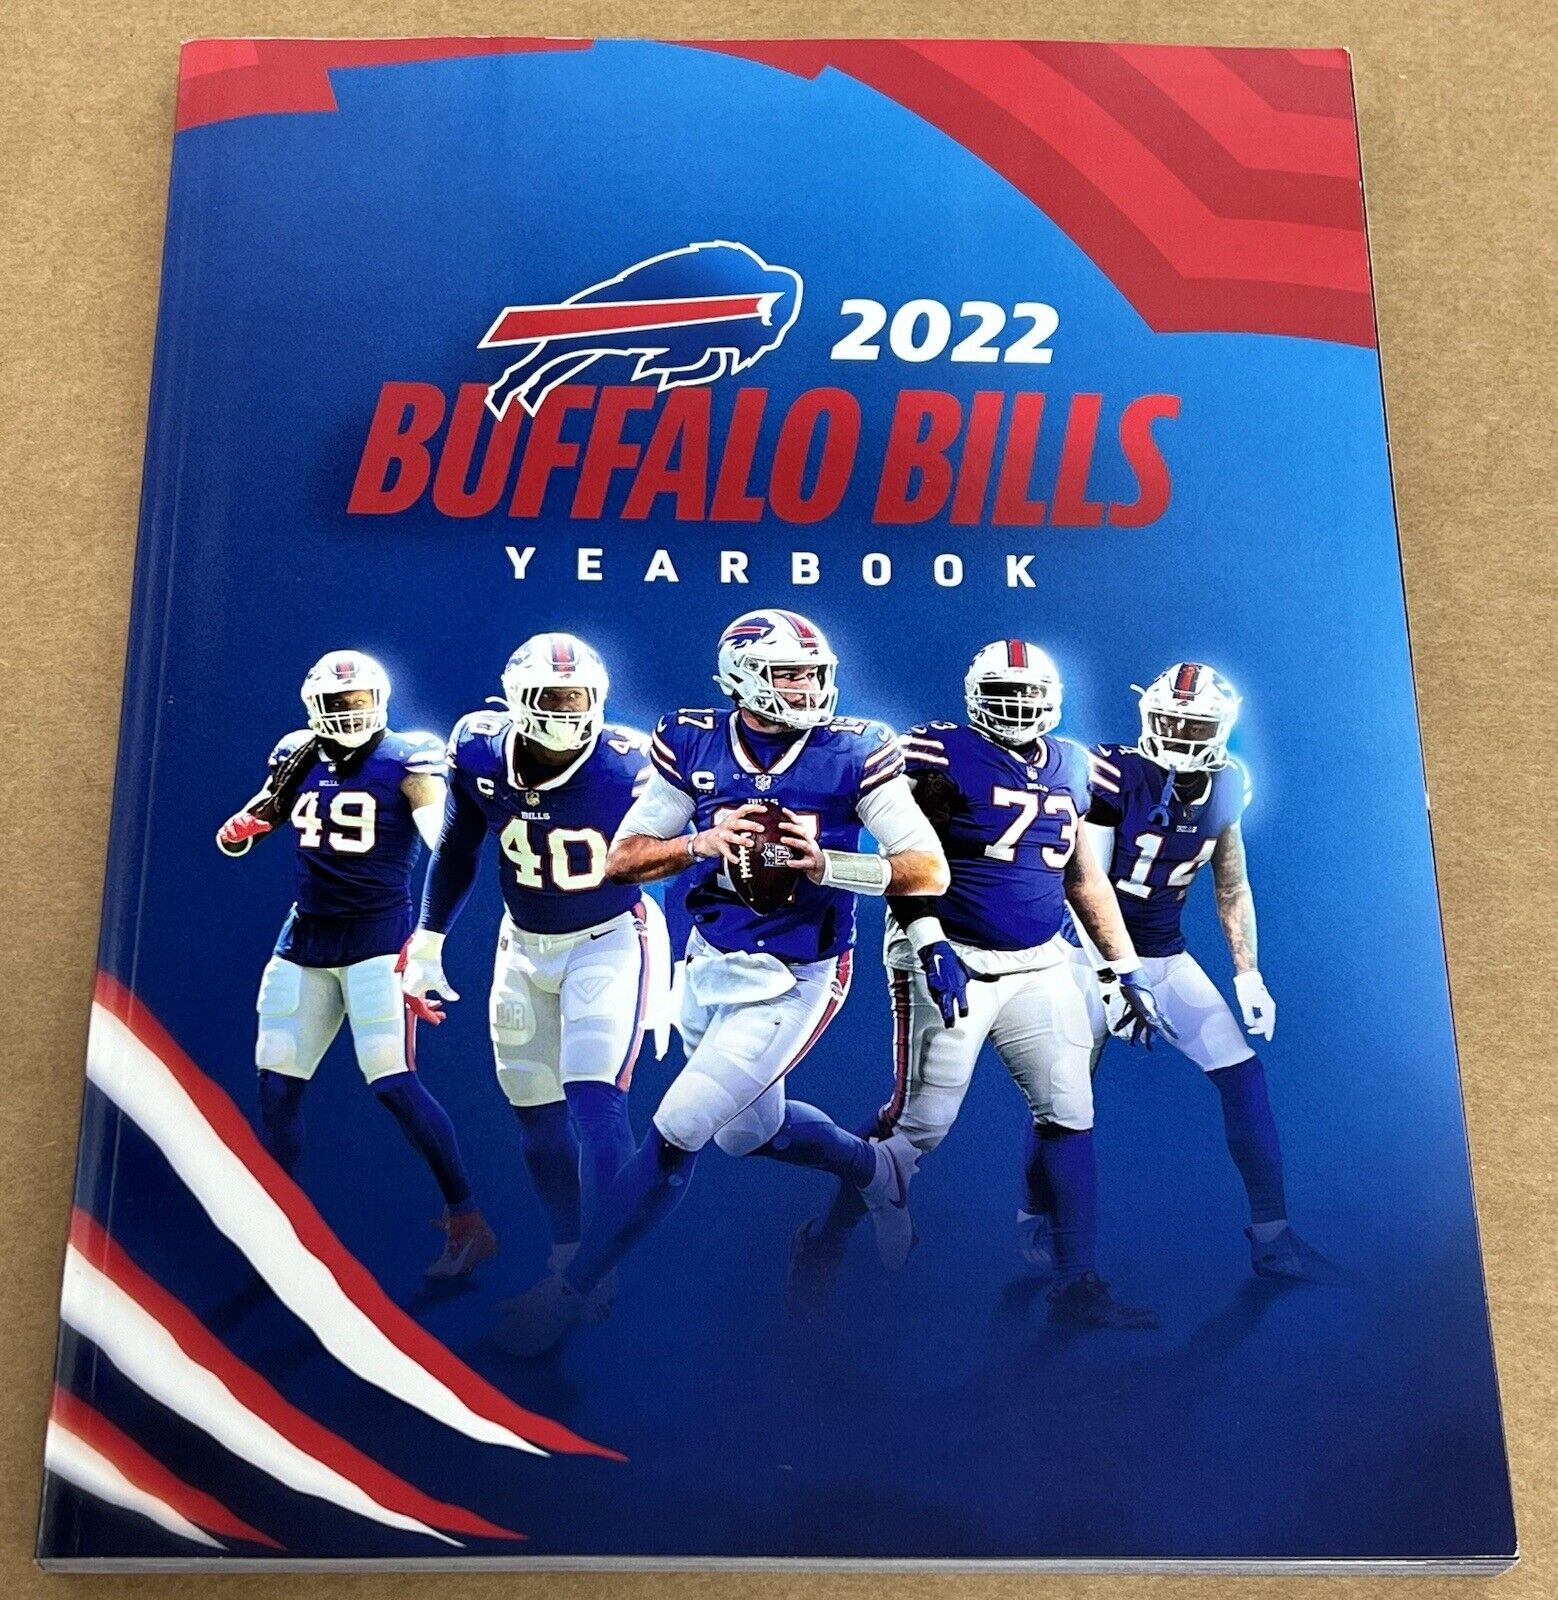 2022 BUFFALO BILLS Yearbook - Shipped in a Box to avoid damage